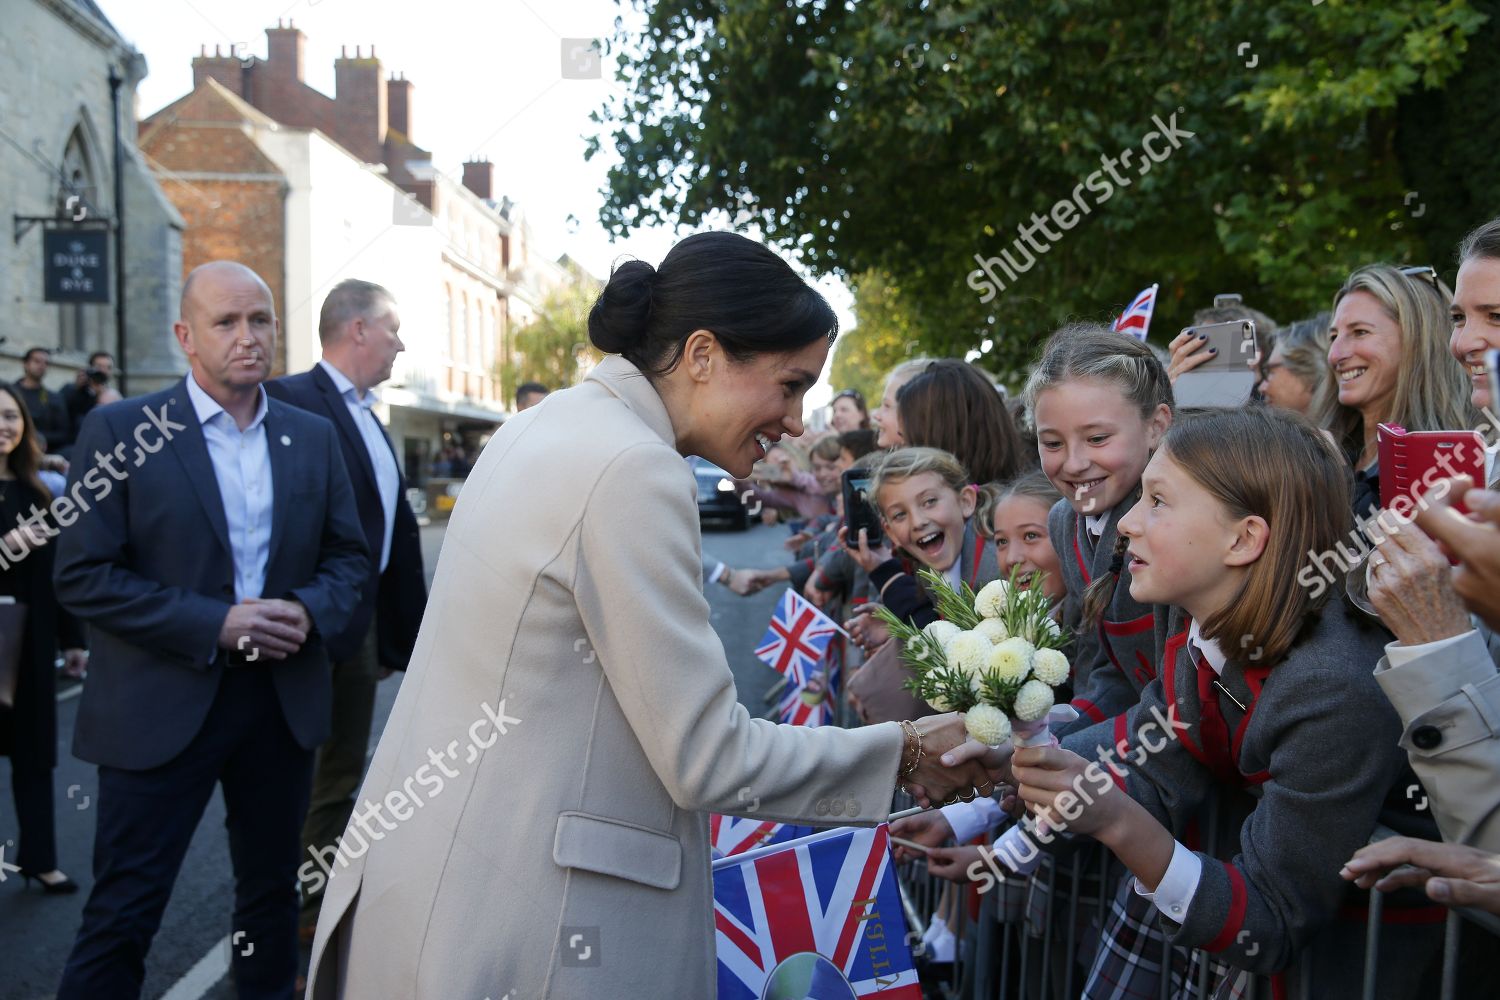 prince-harry-and-meghan-duchess-of-sussex-visit-to-sussex-uk-shutterstock-editorial-9912829d.jpg